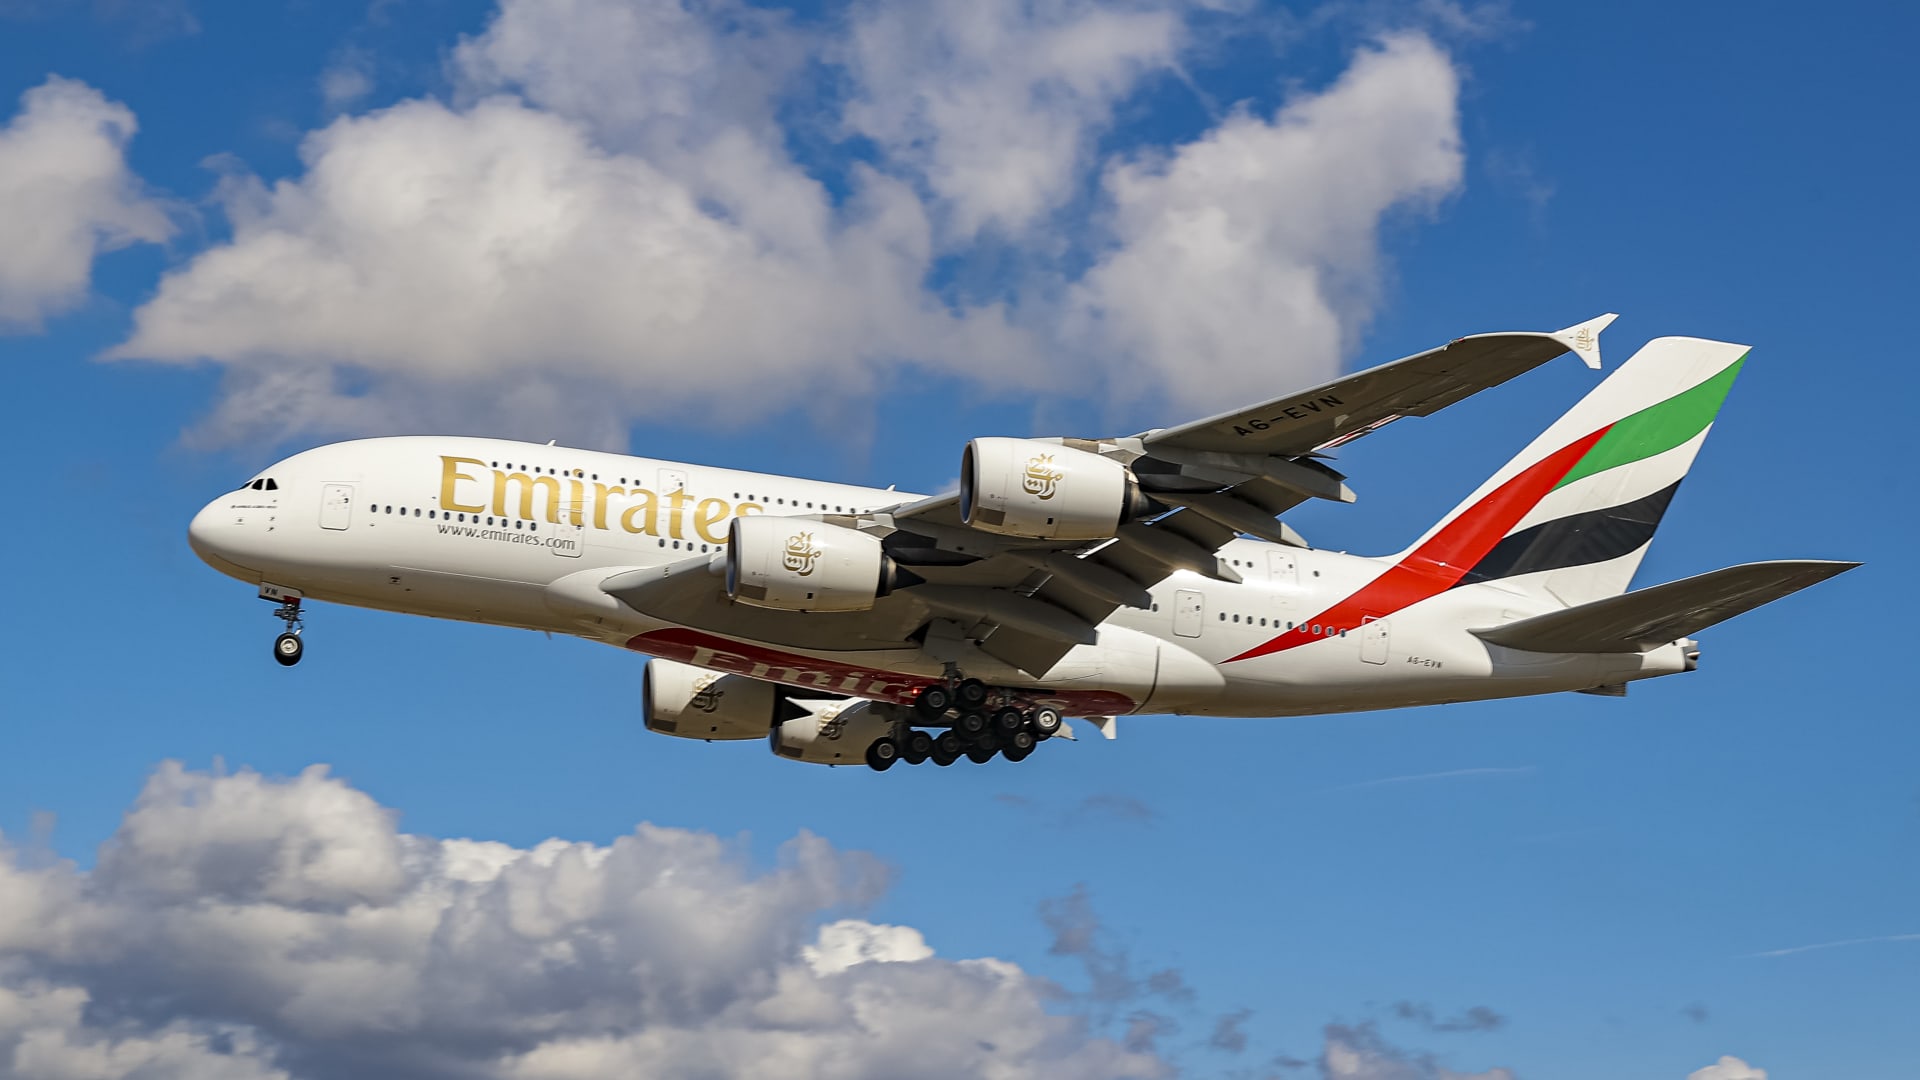 Photo of Dubai-based airline Emirates logs record profits of $3 billion as passenger numbers surge by 123%